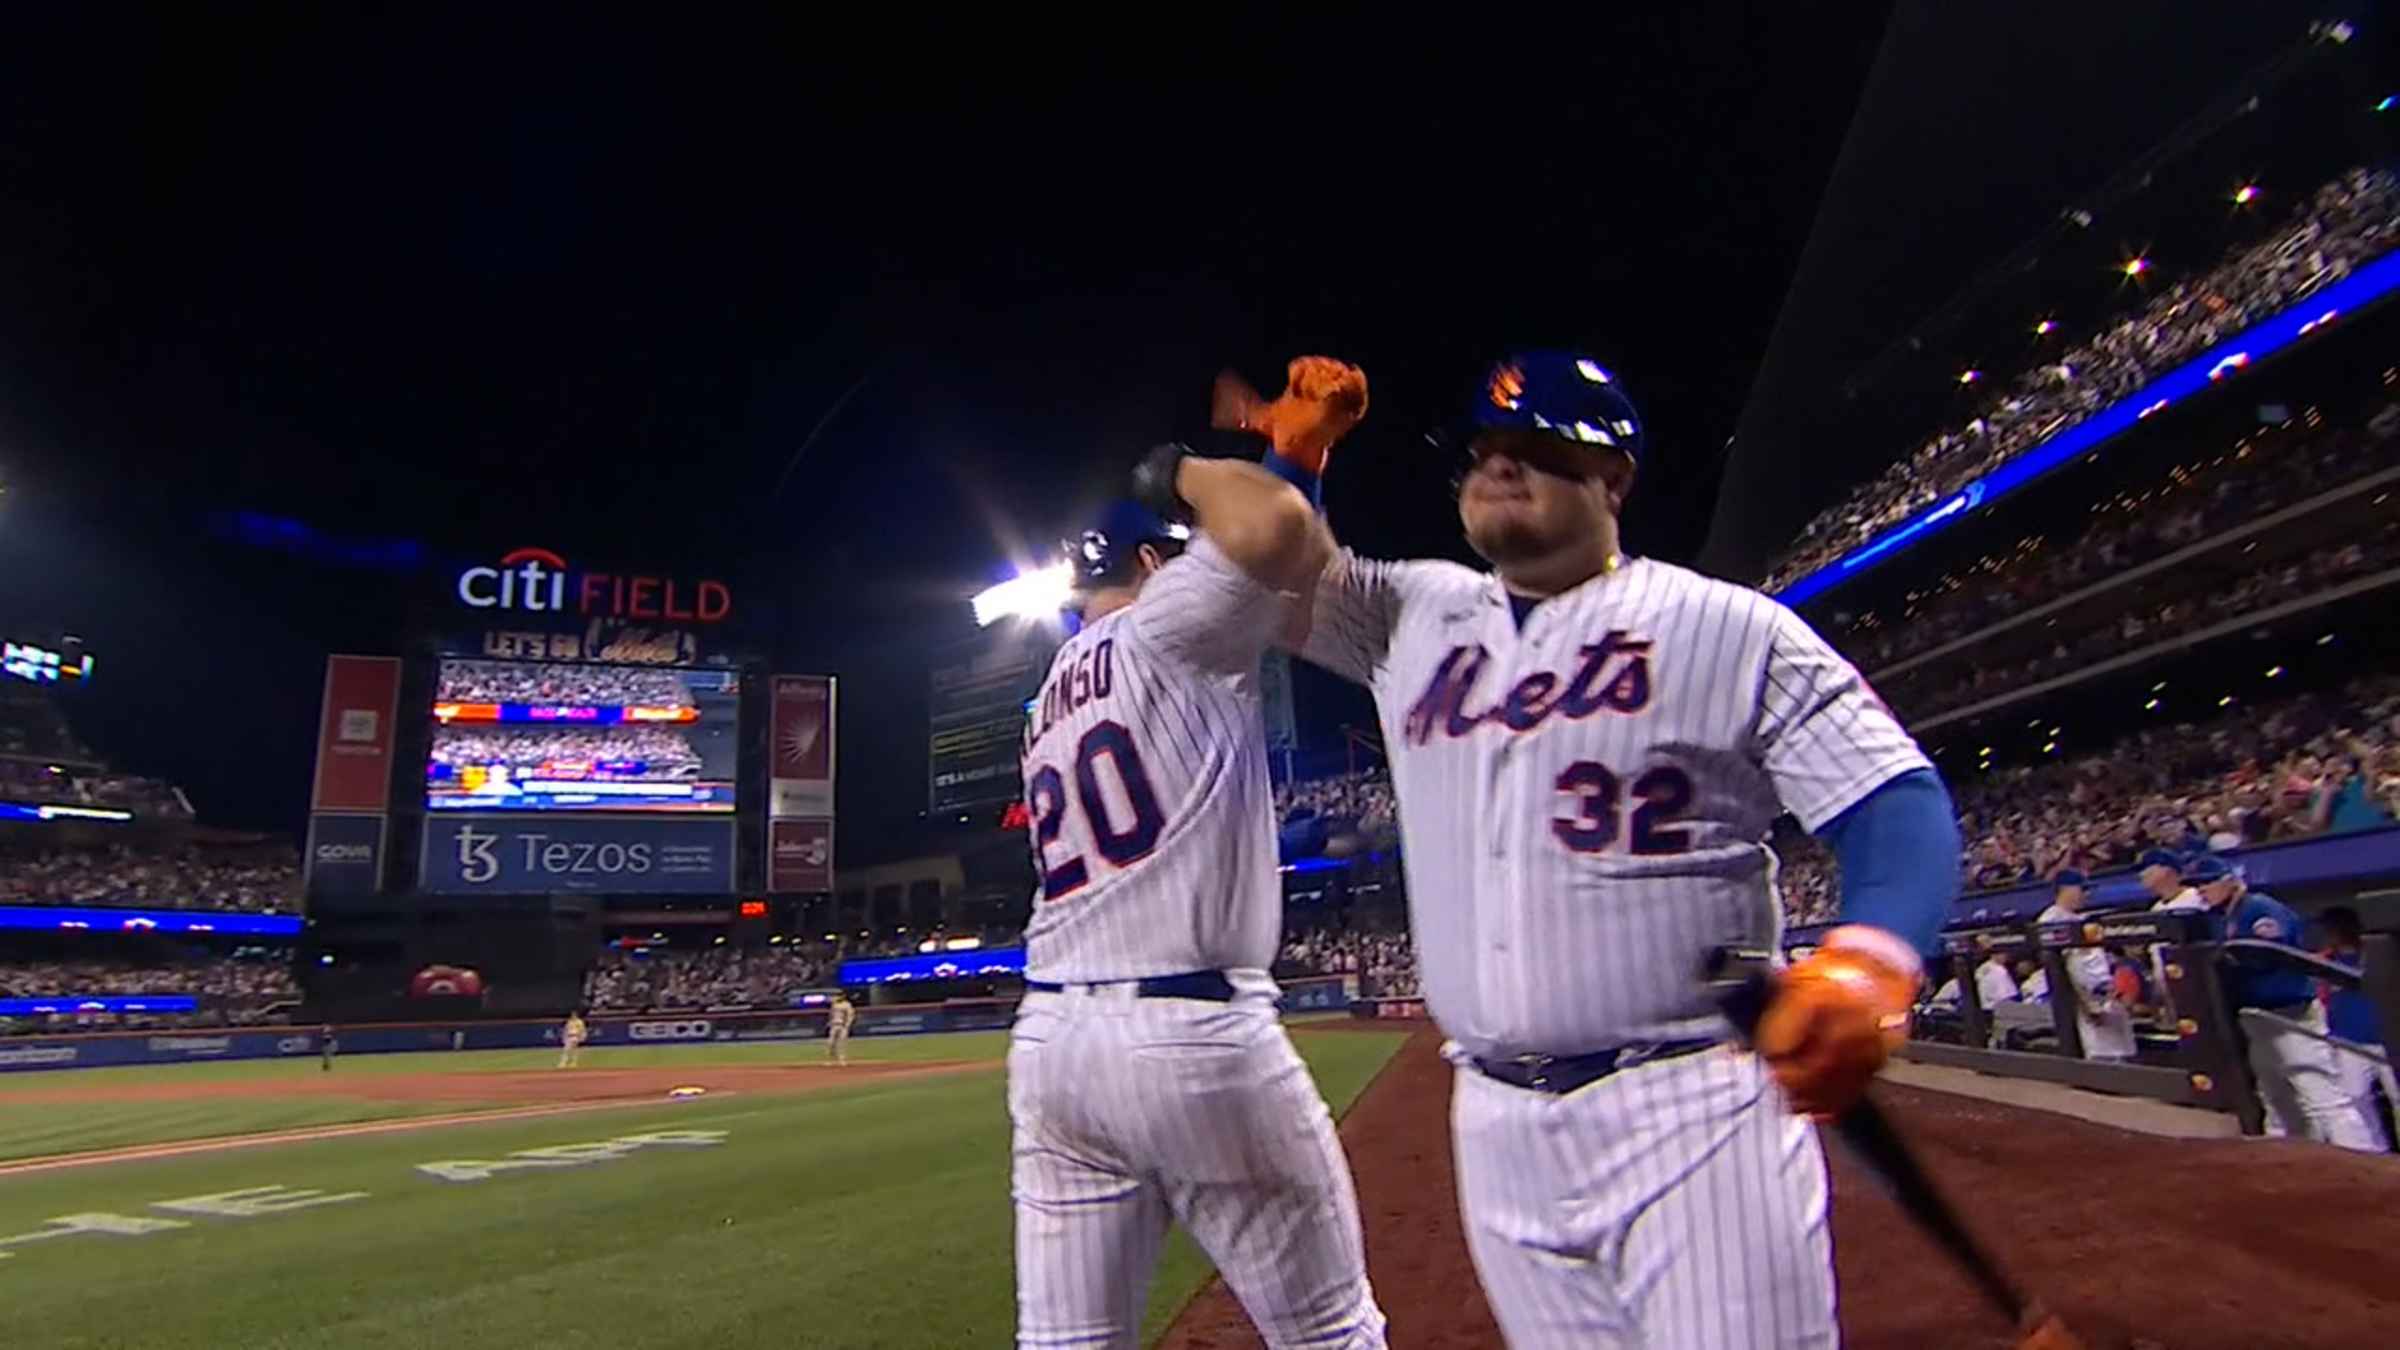 Pete Alonso's 3-run homer gives the Mets a 4-run lead over the Yankees in  the 3rd.